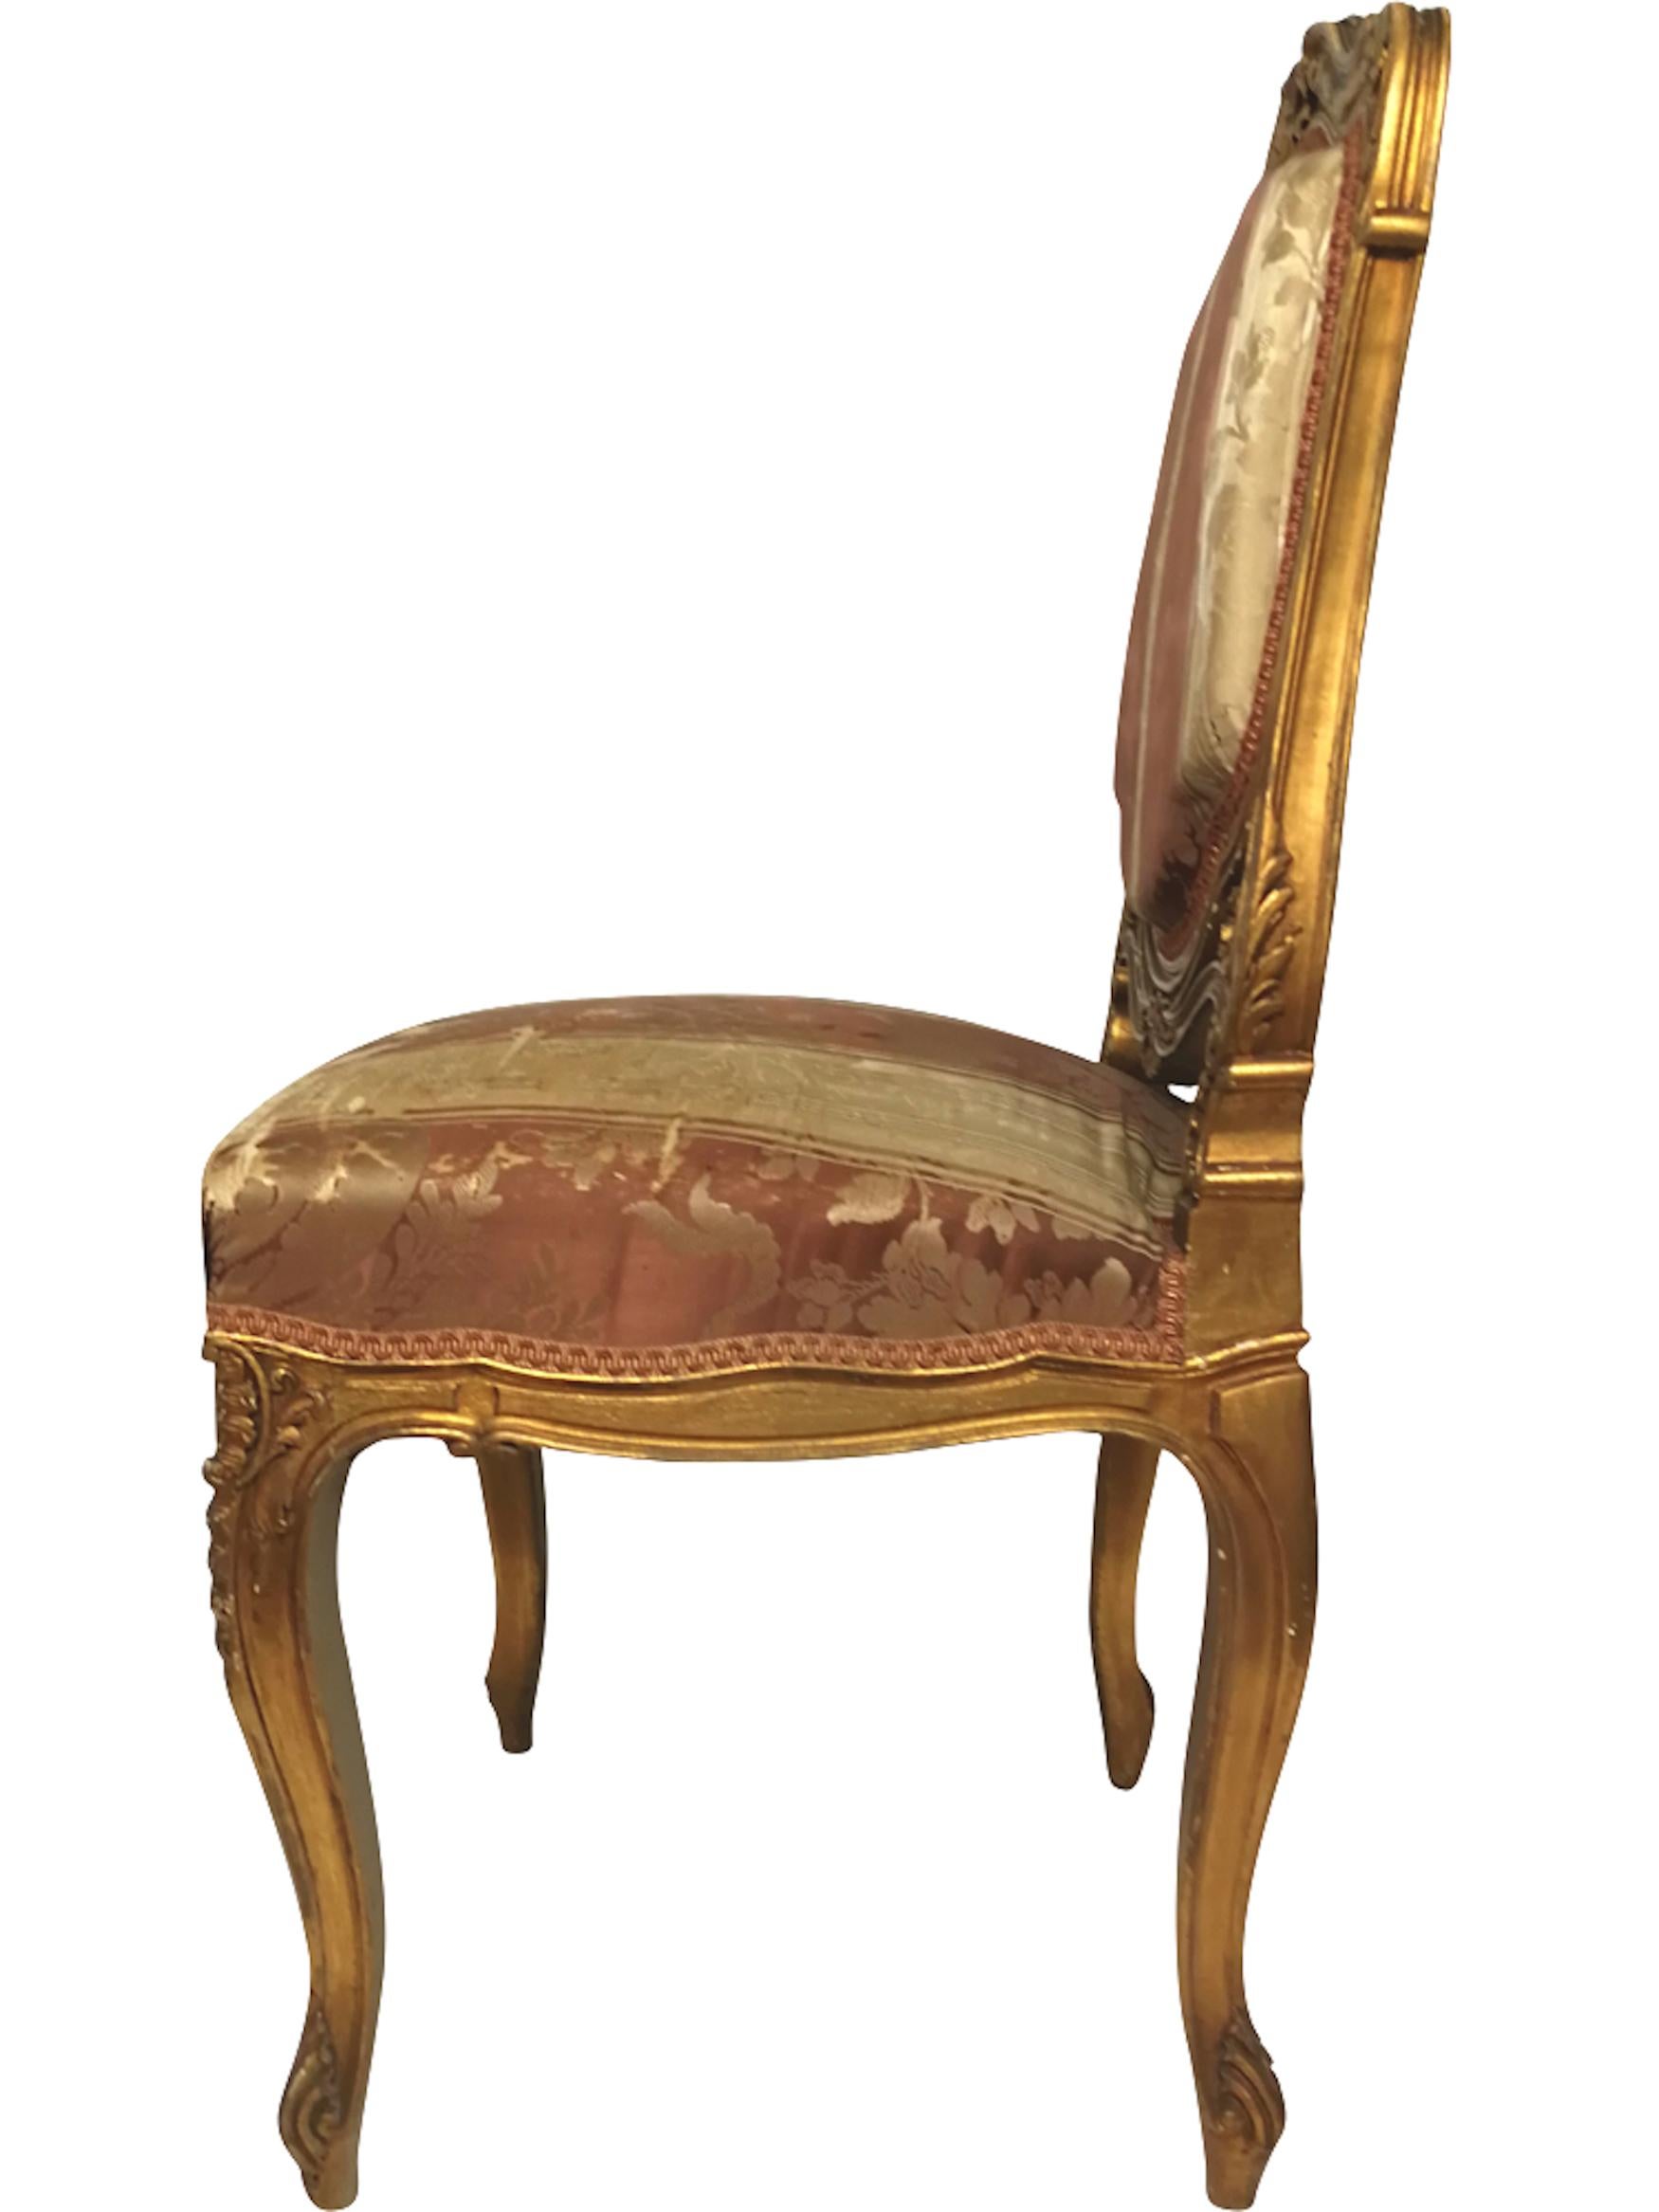 Gilt hand carved wooden chair from the 19th century in Louis XV style and with silk upholstery. The upholstery of the chair is of the period.
Origin: France.
Period: 19th century, Napoleon III period.